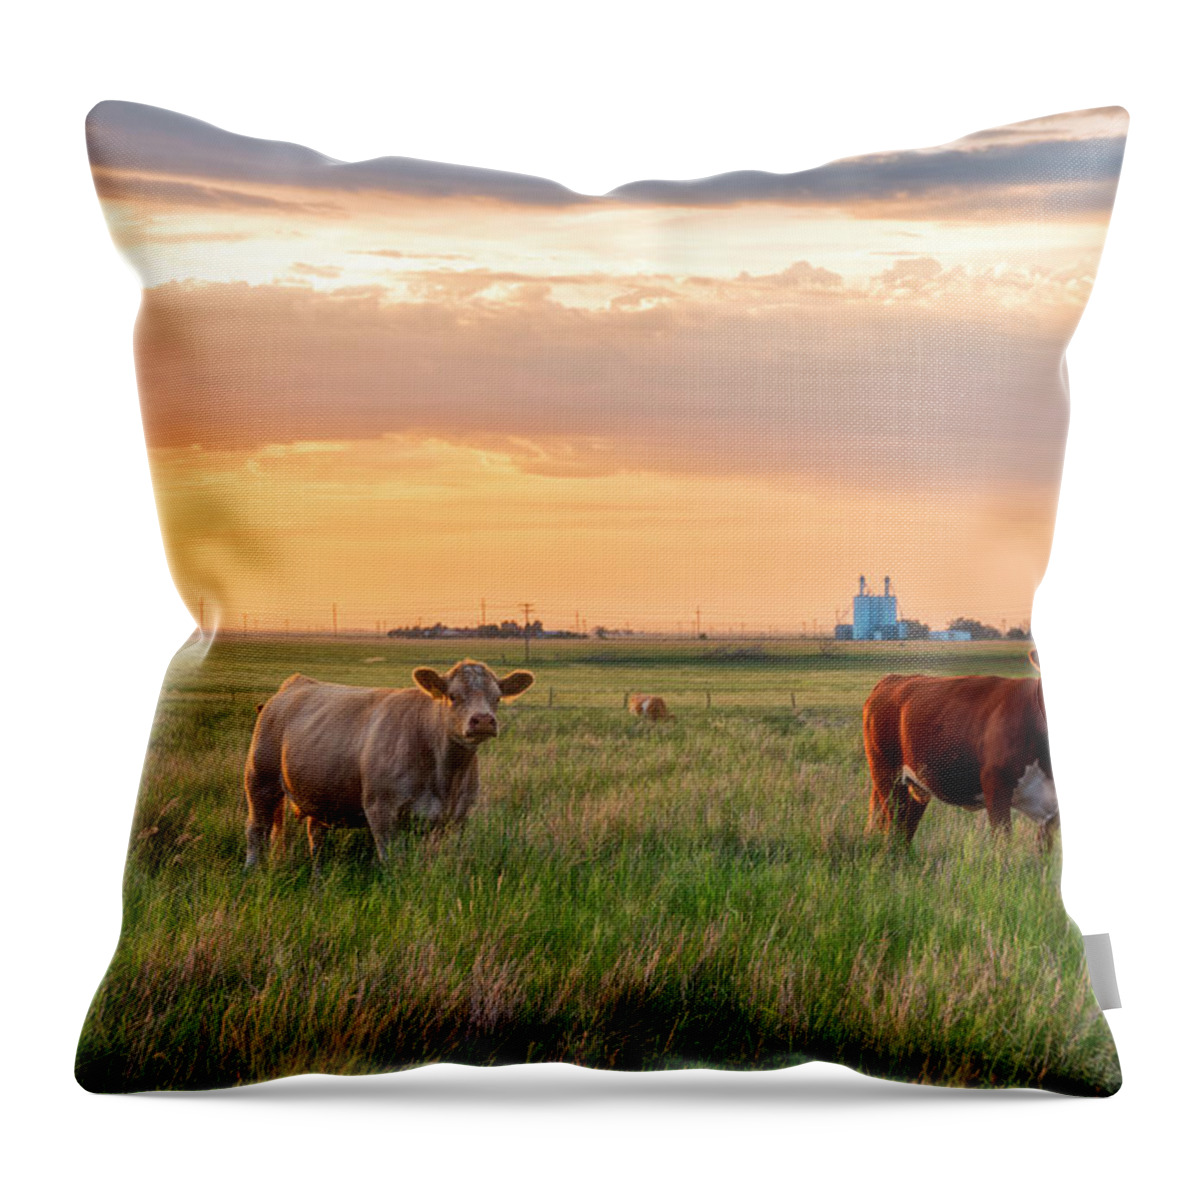 Sunset Throw Pillow featuring the photograph Sunset Cattle by Russell Pugh